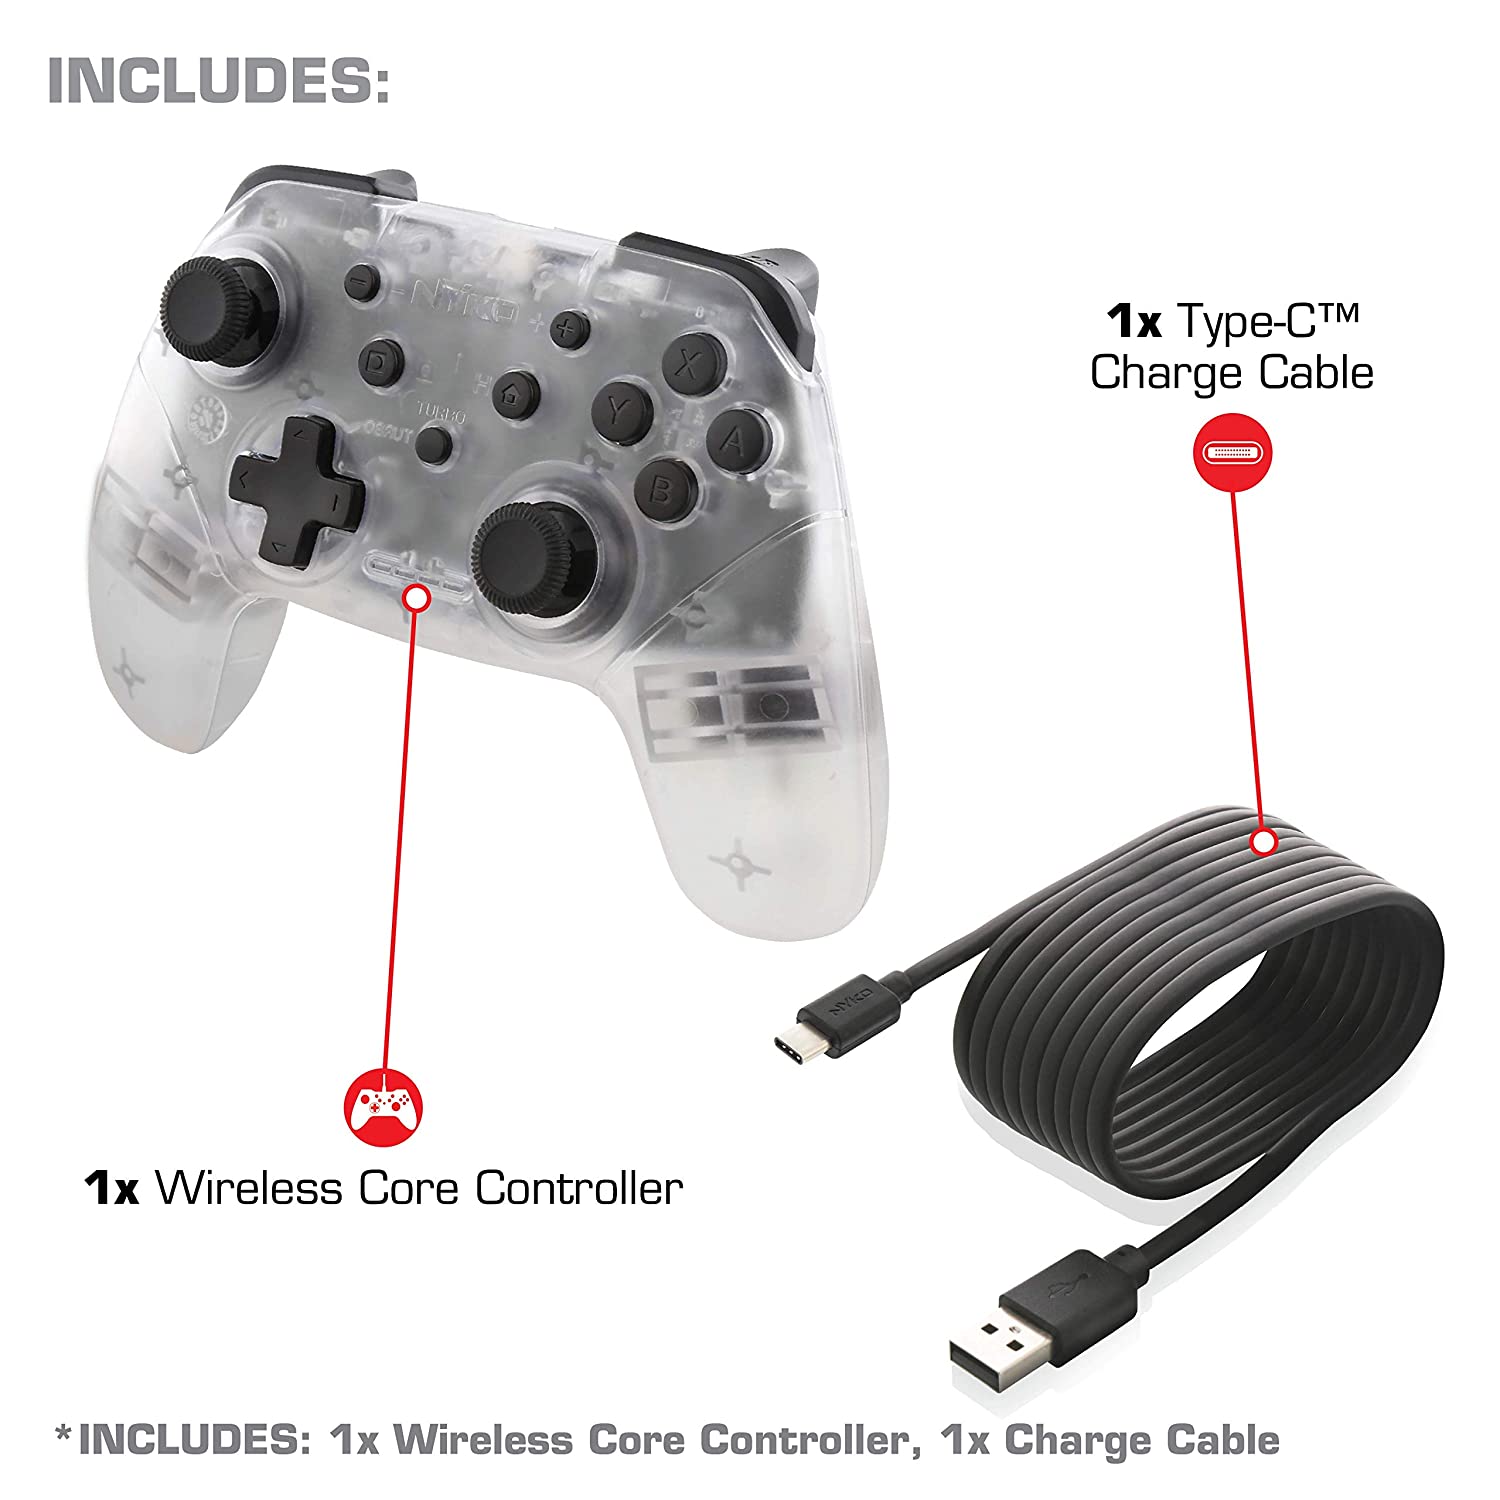 Nyko NSW Wireless Core Controller Clear (87260)